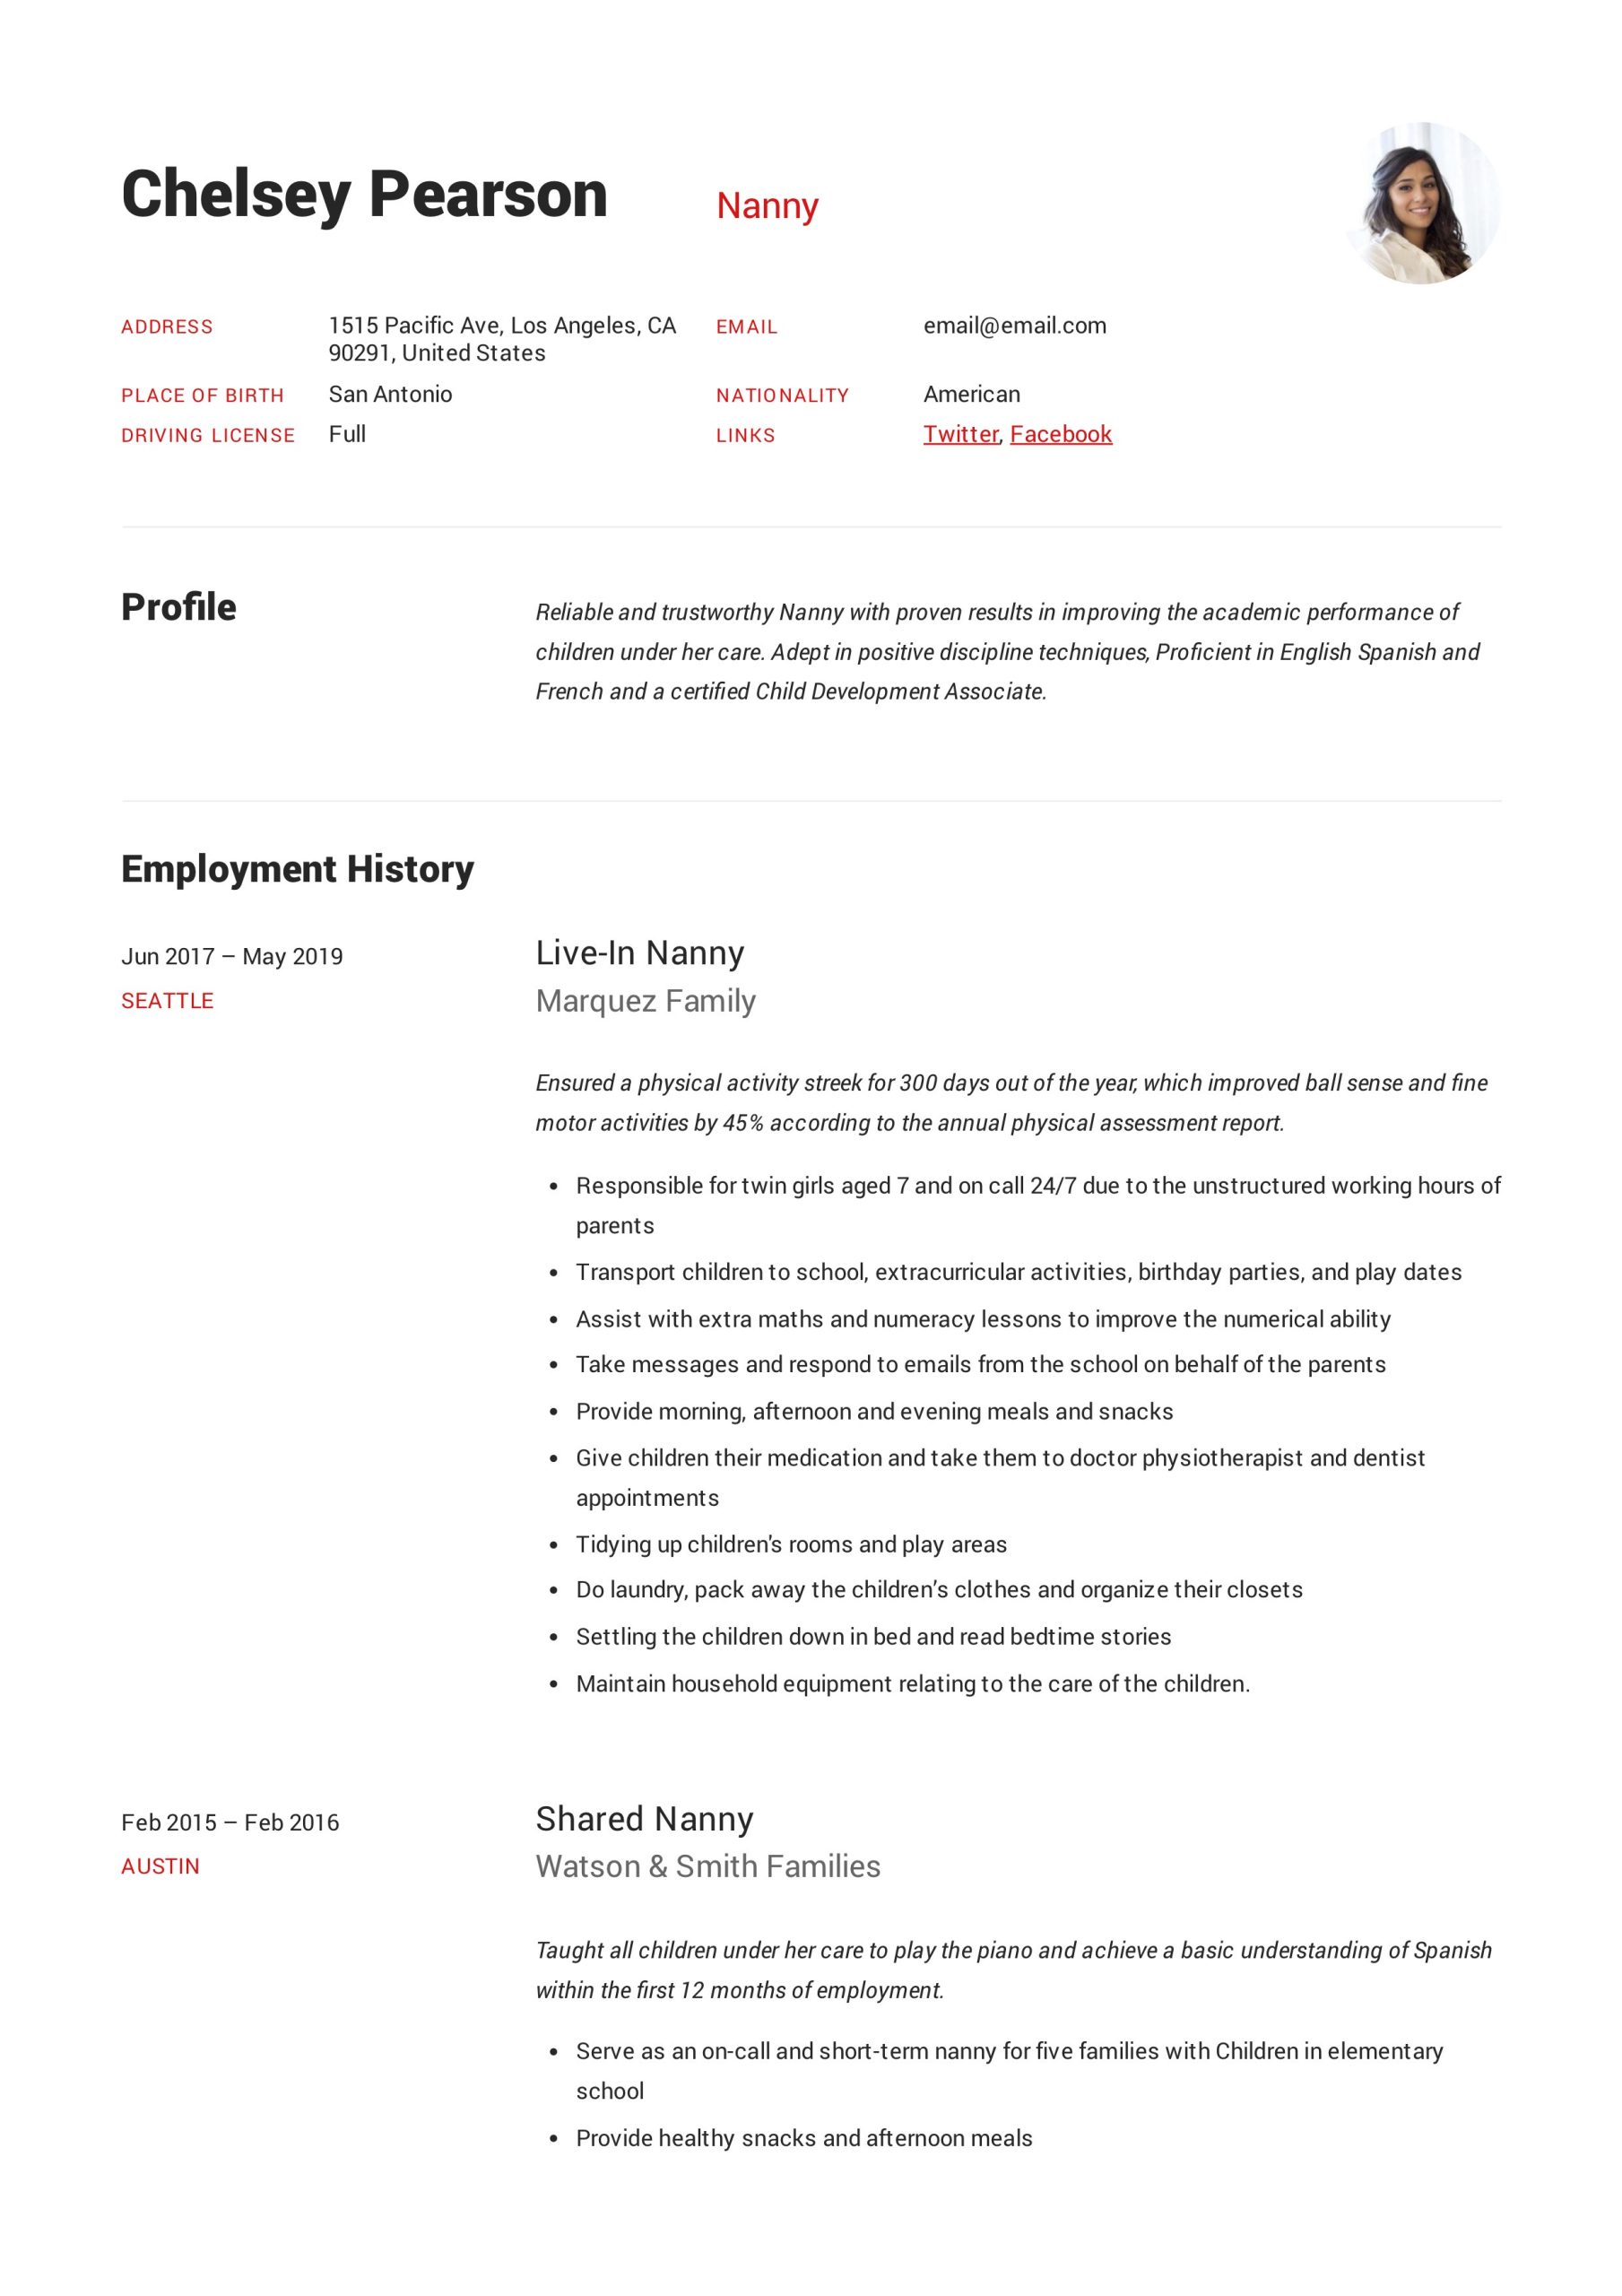 Sample Resume for Newborn Care Specialists Nanny Resume & Writing Guide  12 Template Samples Pdf